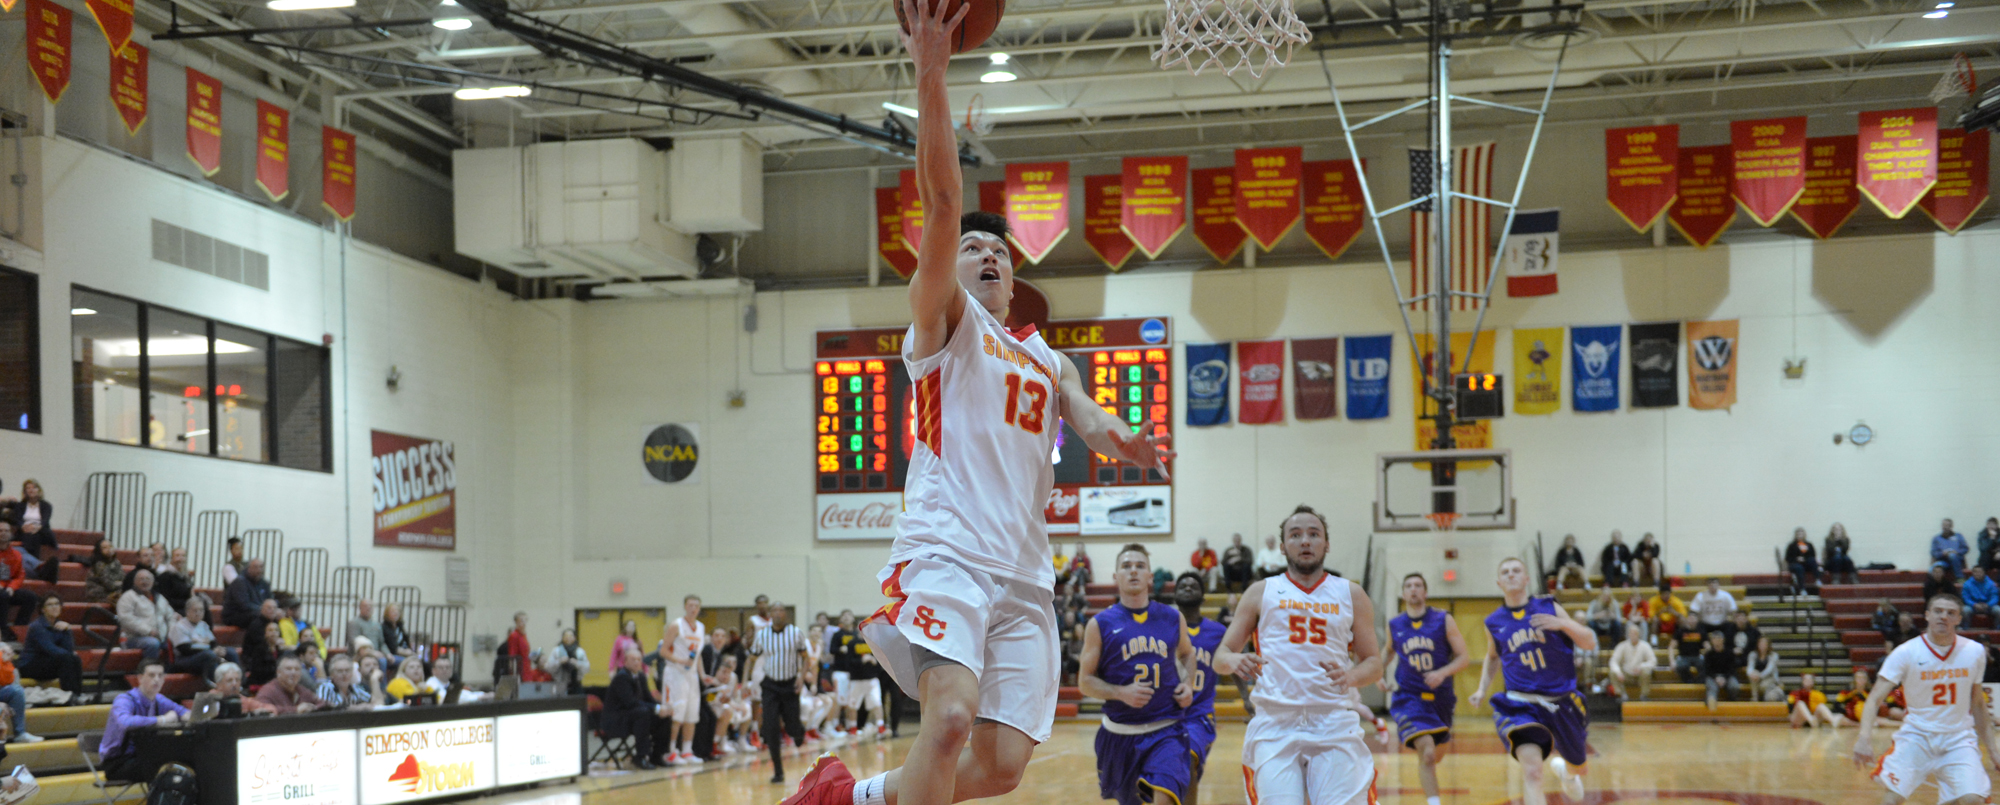 Ben Rajewski scored 11 points off the bench in the Storm's 101-95 win over Loras on Jan. 25.